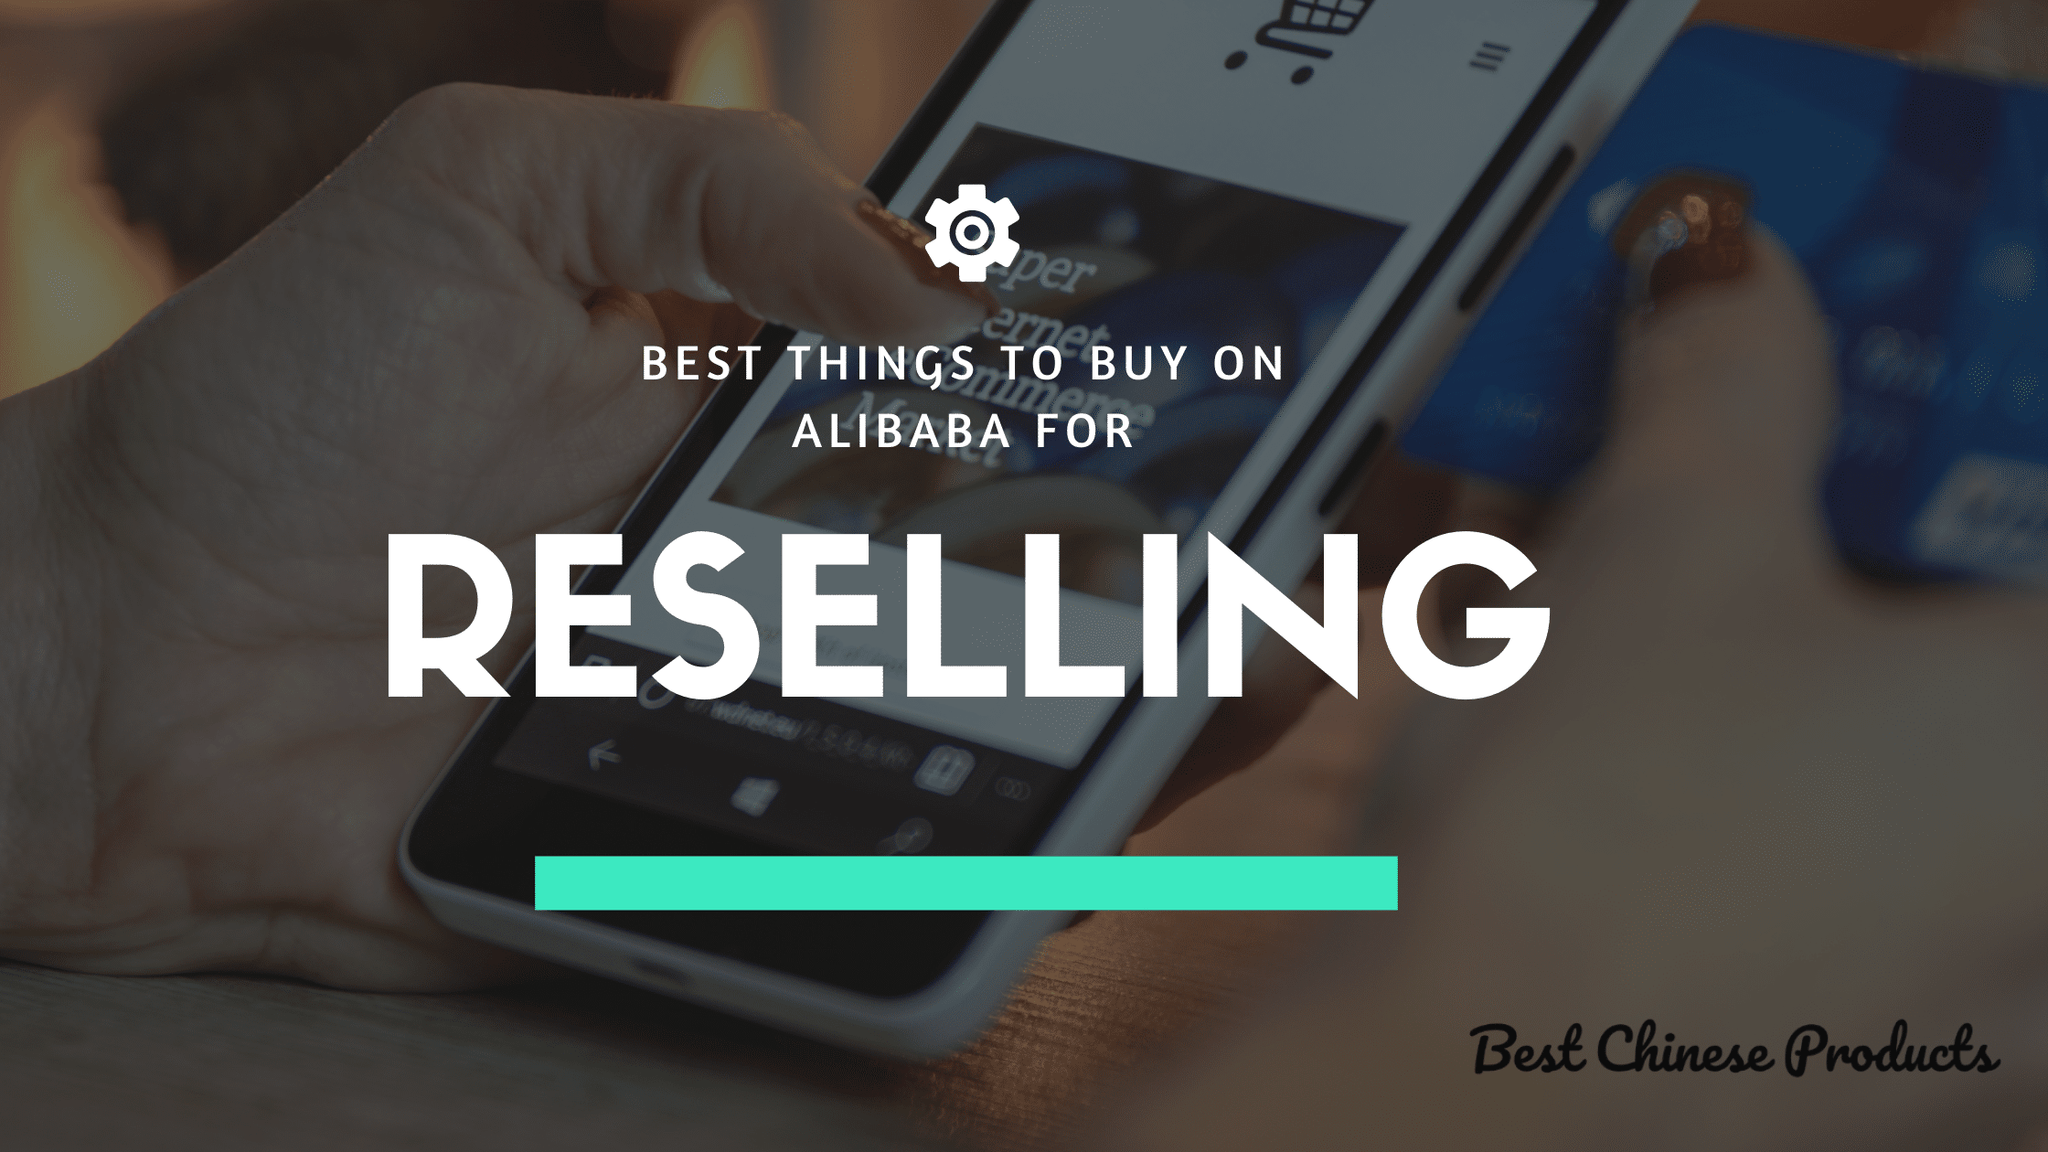 25 Best Things To Buy On Alibaba For Resell